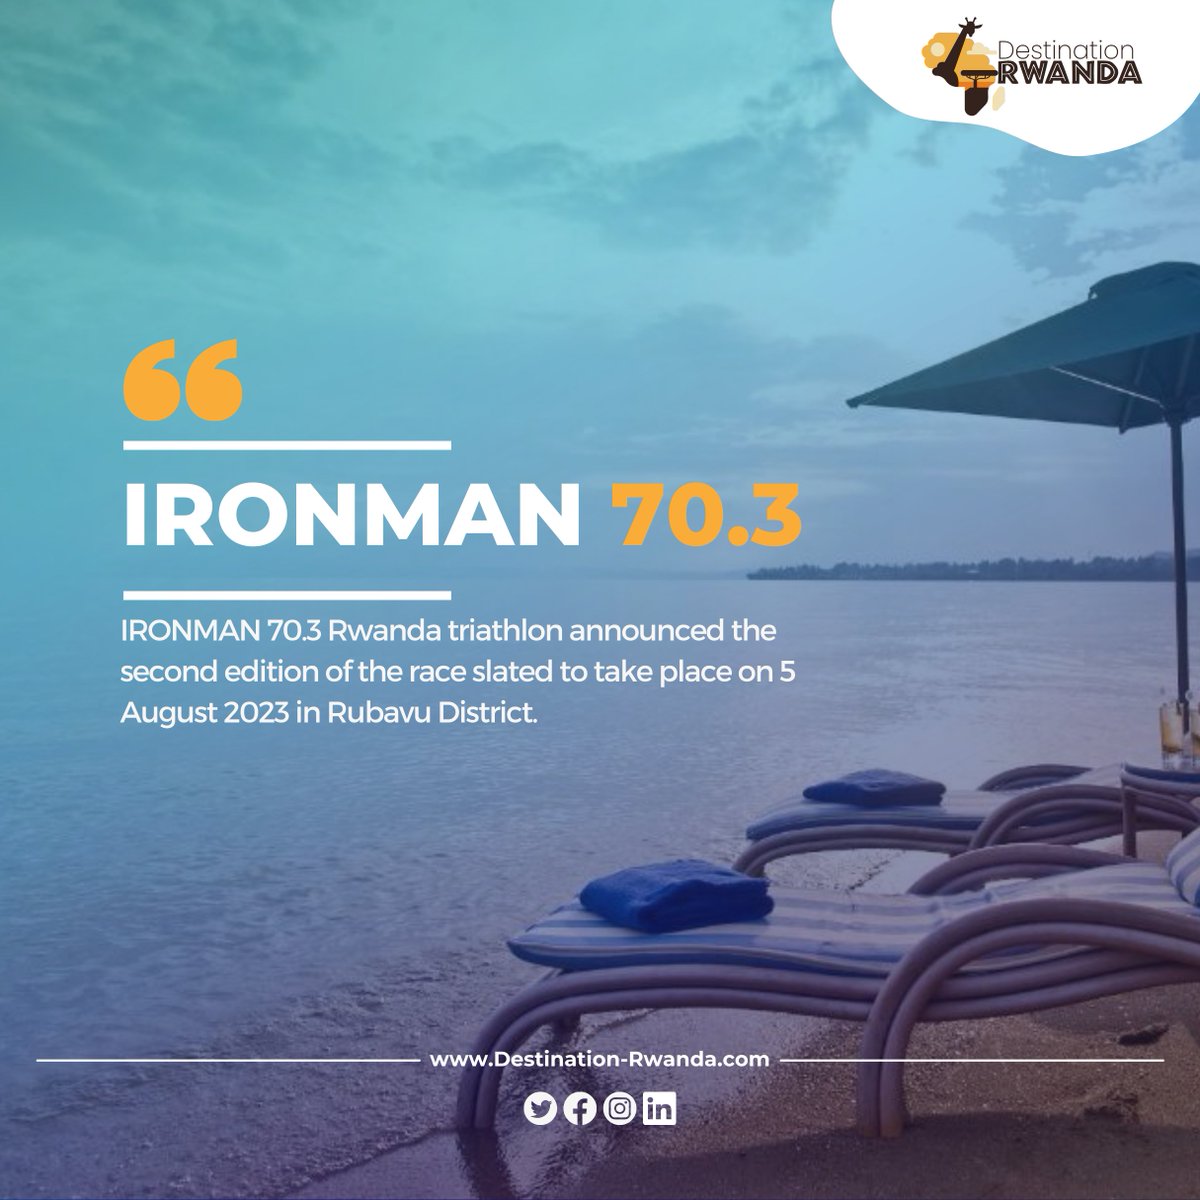 We are thrilled to welcome all athletes and fans to Rwanda, in a couple of days, for the
second edition of the IRONMAN 70.3, taking place in Rubavu. #ironmanrwanda #visitrwanda #anythingispossible #destinationrwanda #travel
#travelling #beach #sunset #triathlon #holiday #style